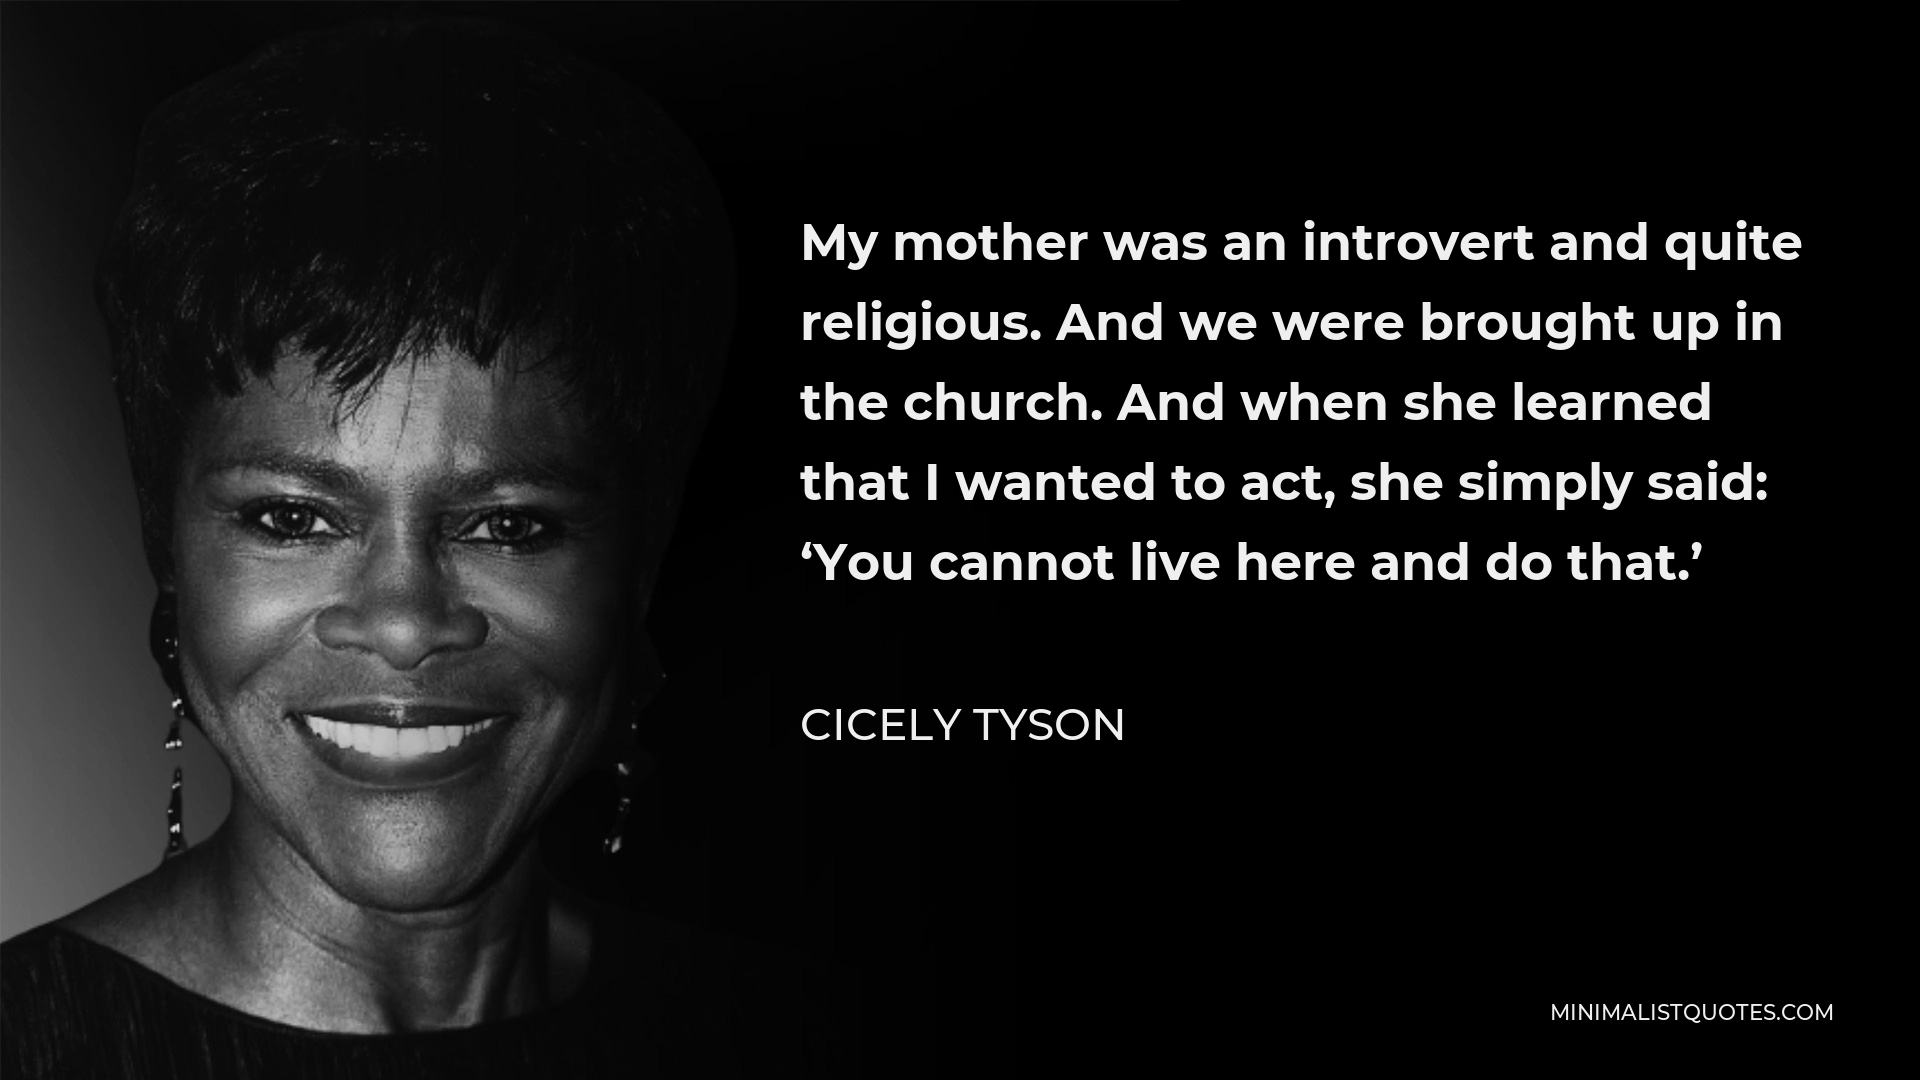 Cicely Tyson Quote - My mother was an introvert and quite religious. And we were brought up in the church. And when she learned that I wanted to act, she simply said: ‘You cannot live here and do that.’